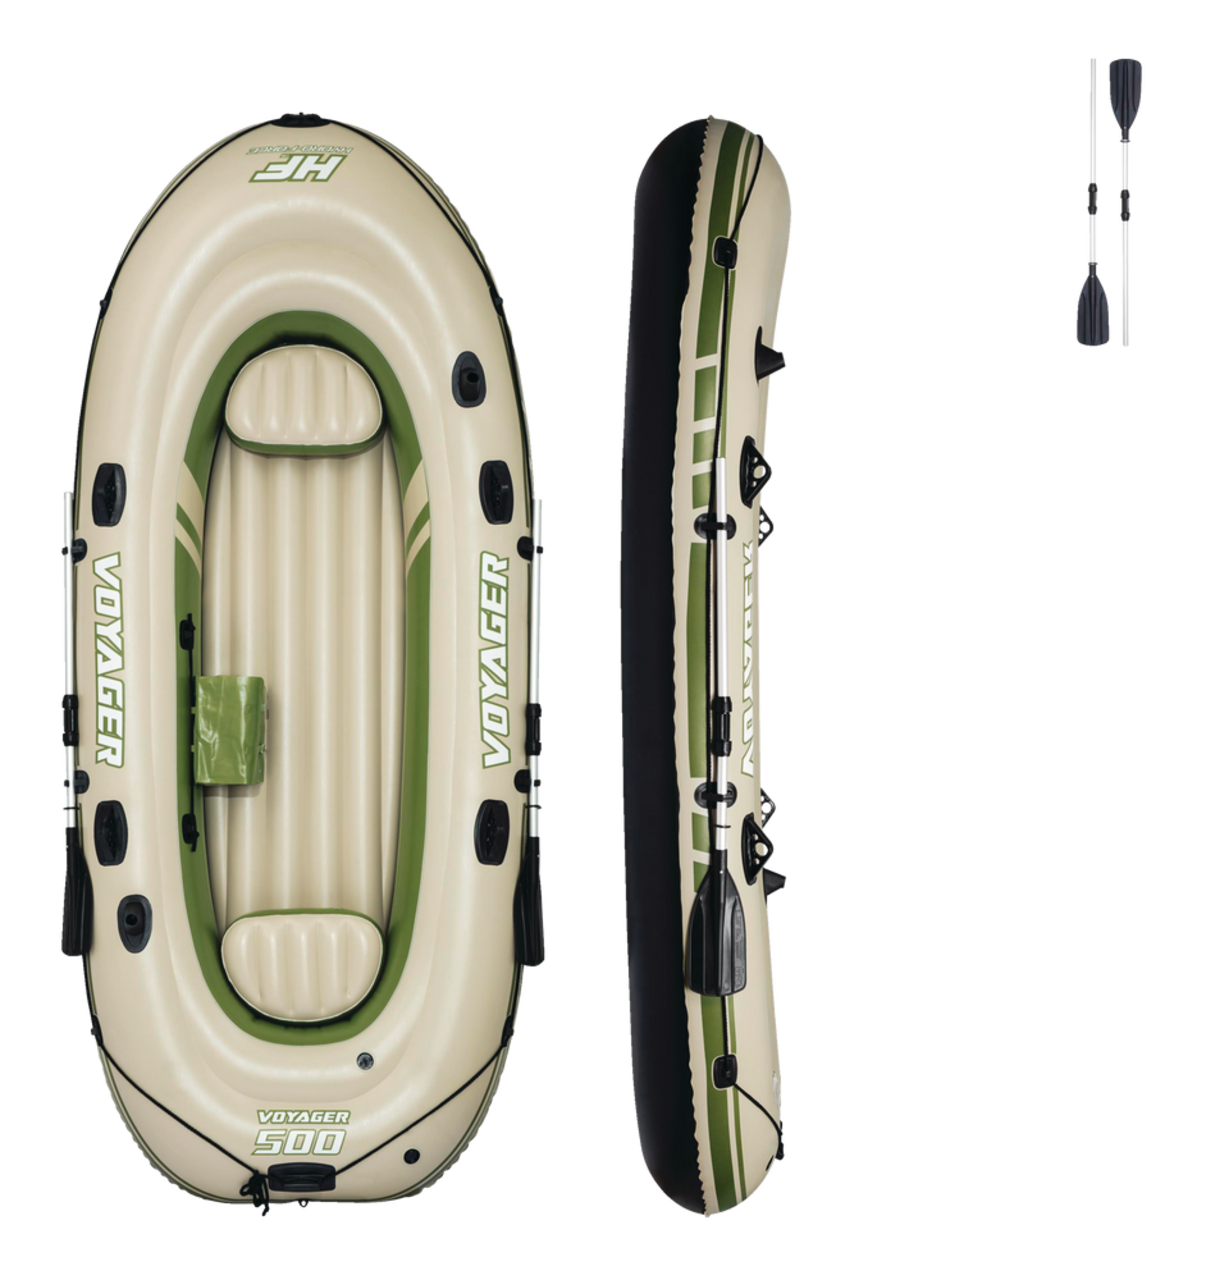 https://media-www.canadiantire.ca/product/playing/seasonal-recreation/marine-water-fun/0798326/-bestway-hydroforce-voyager-500-inflatable-boat-5a769b0b-81fd-4ca5-a554-ce7bef16354e.png?imdensity=1&imwidth=640&impolicy=mZoom